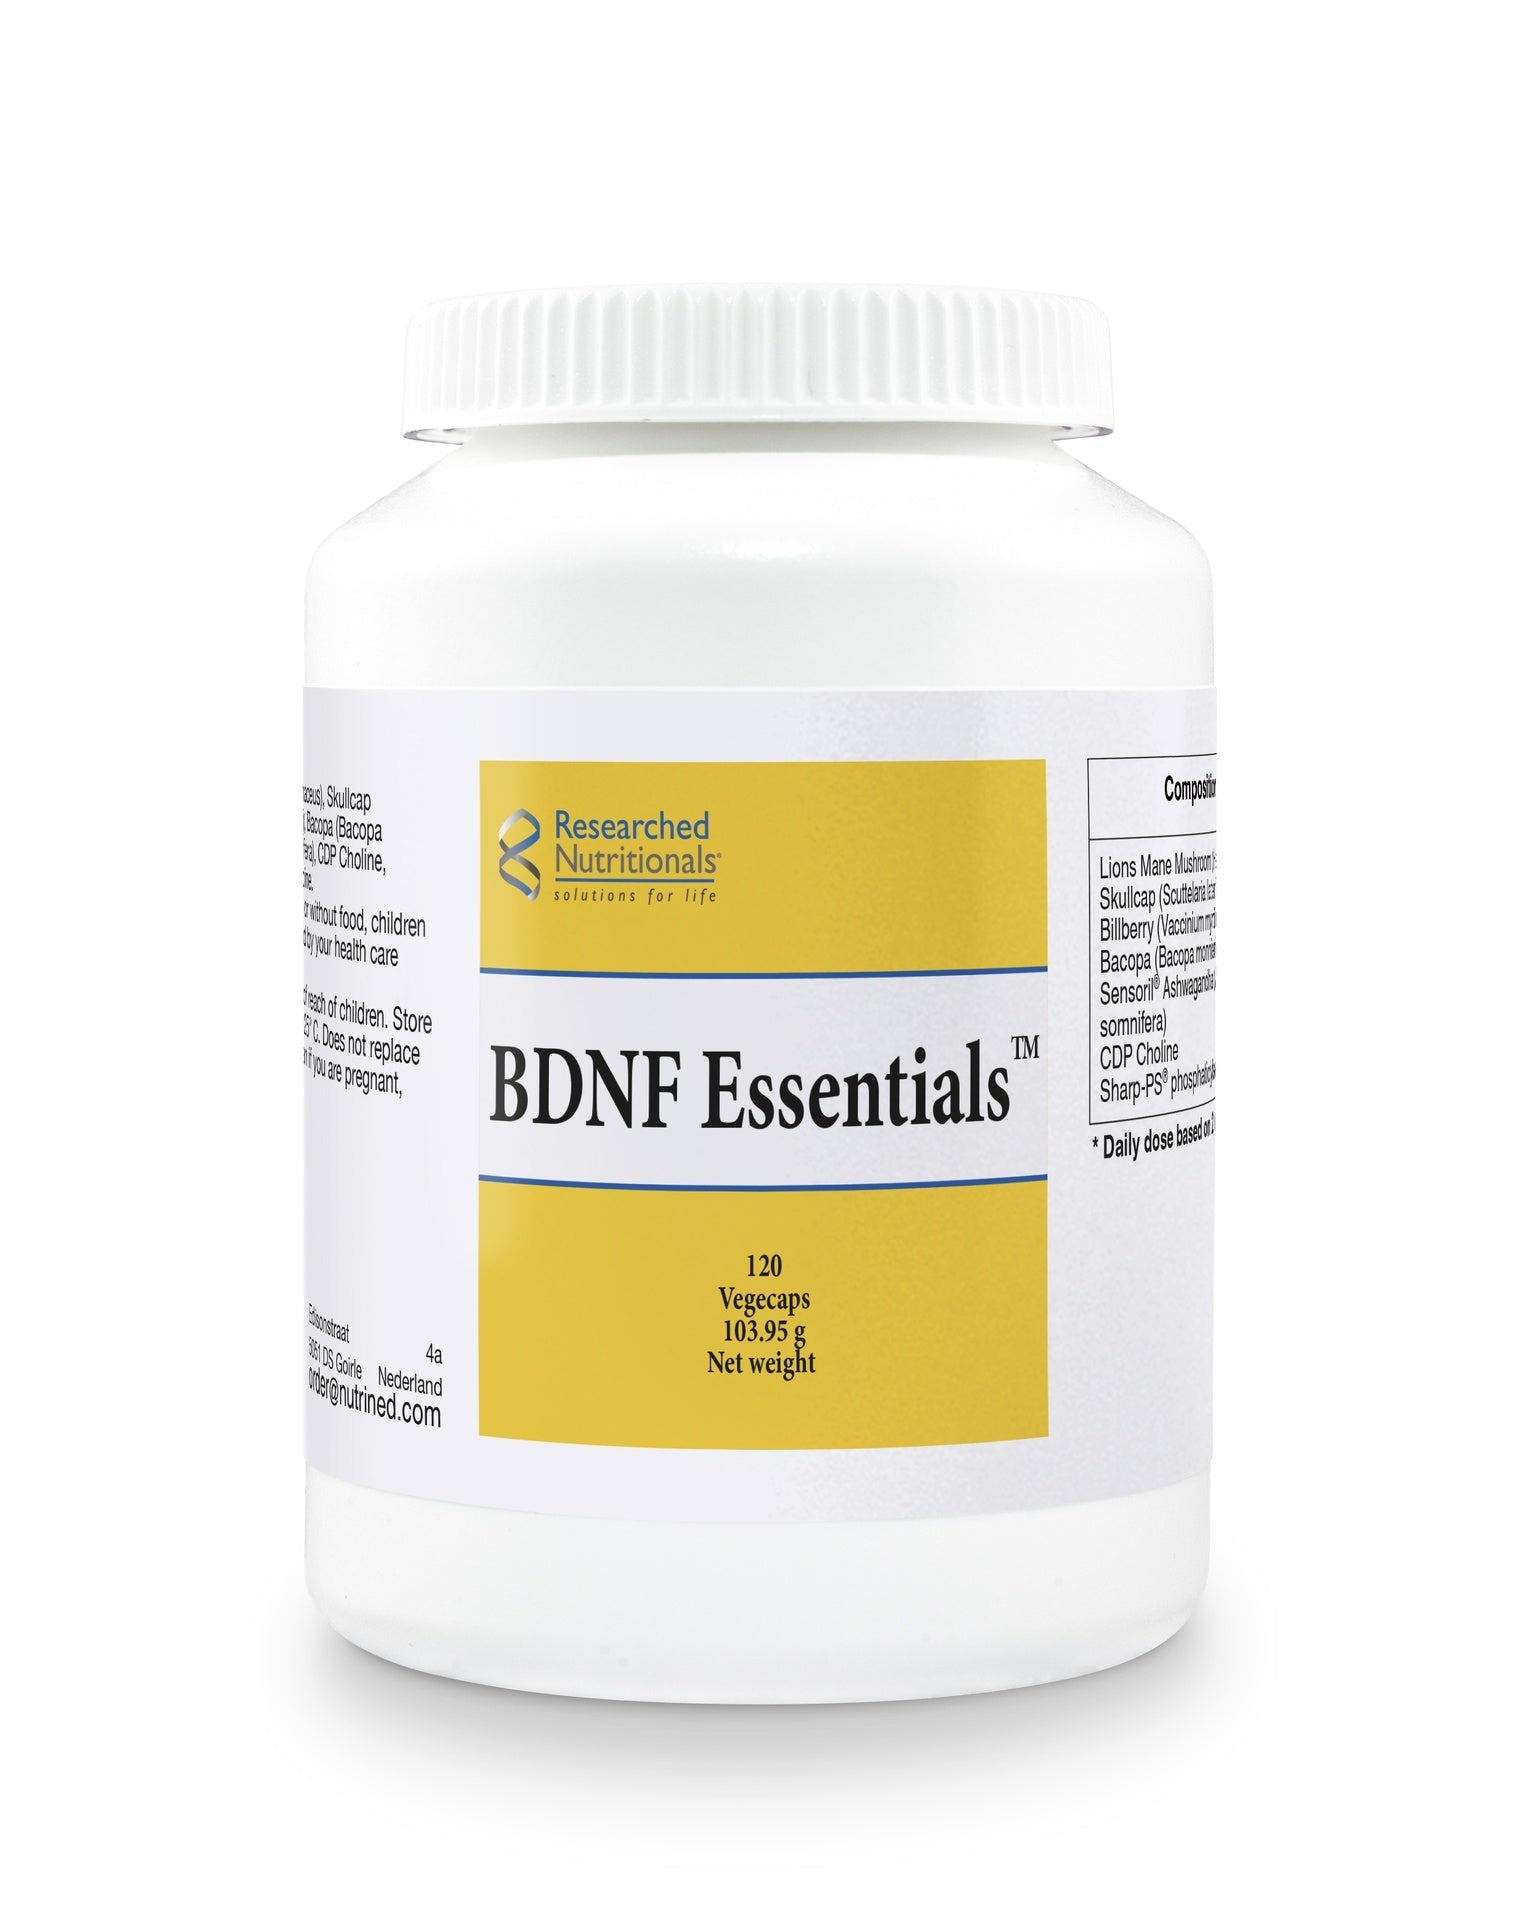 BDNF Essentials - 120 Capsules | Researched Nutritionals